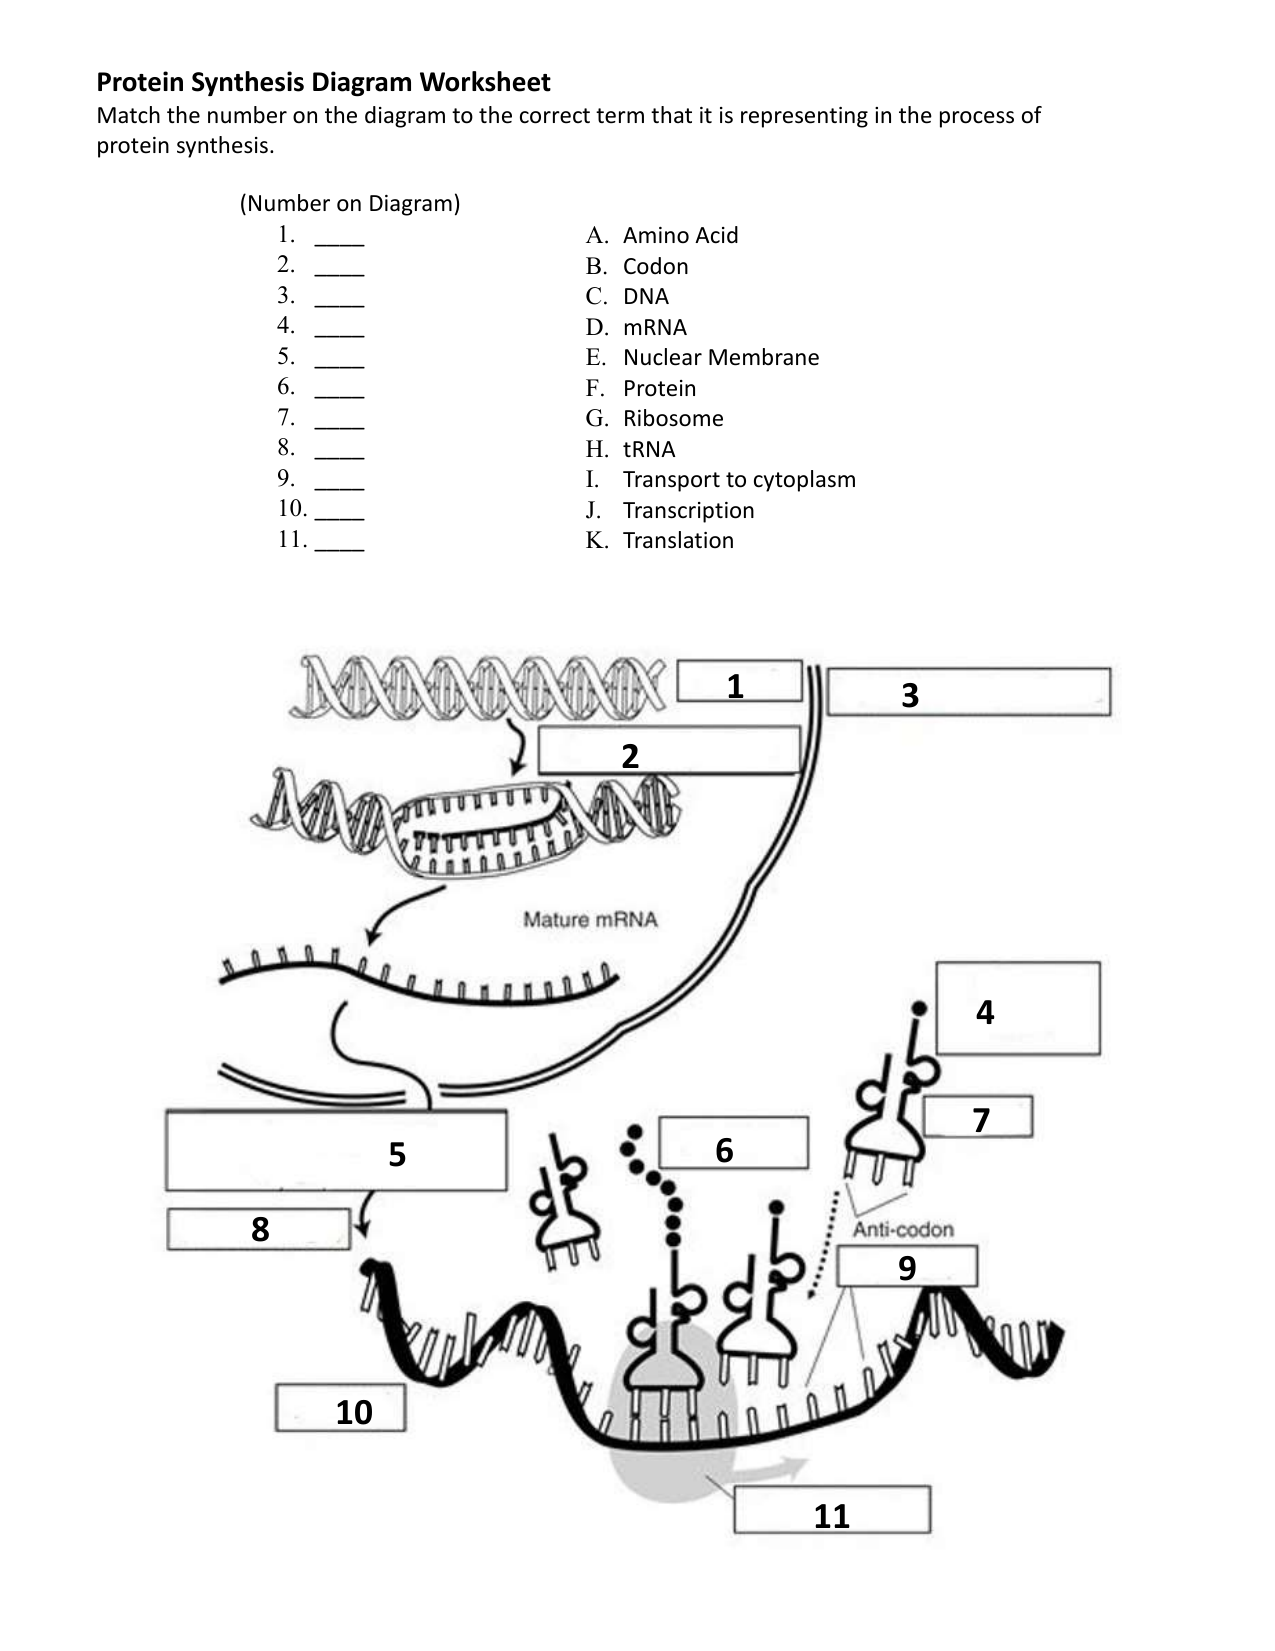 Protein synthesis diagram worksheet Within Transcription And Translation Practice Worksheet